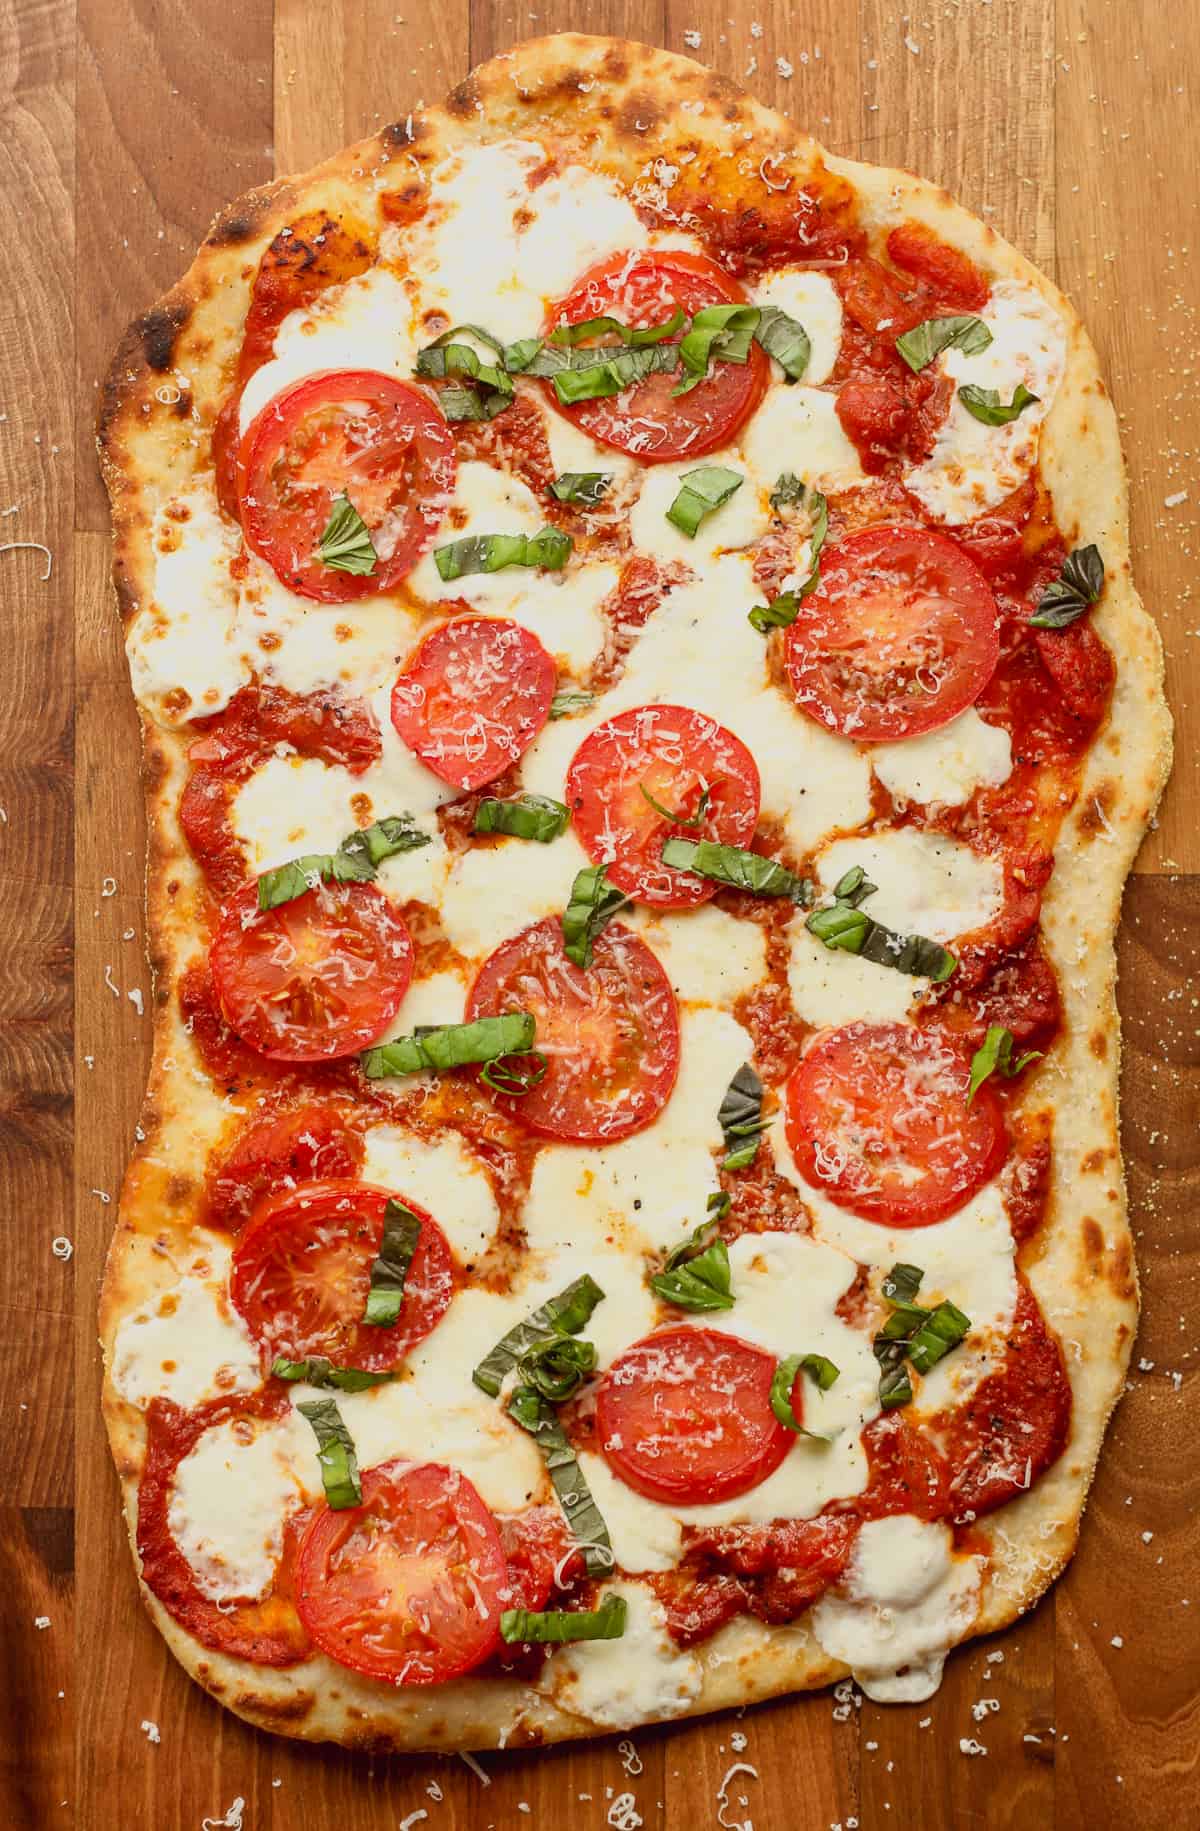 A margherita flatbread pizza just out of the oven.